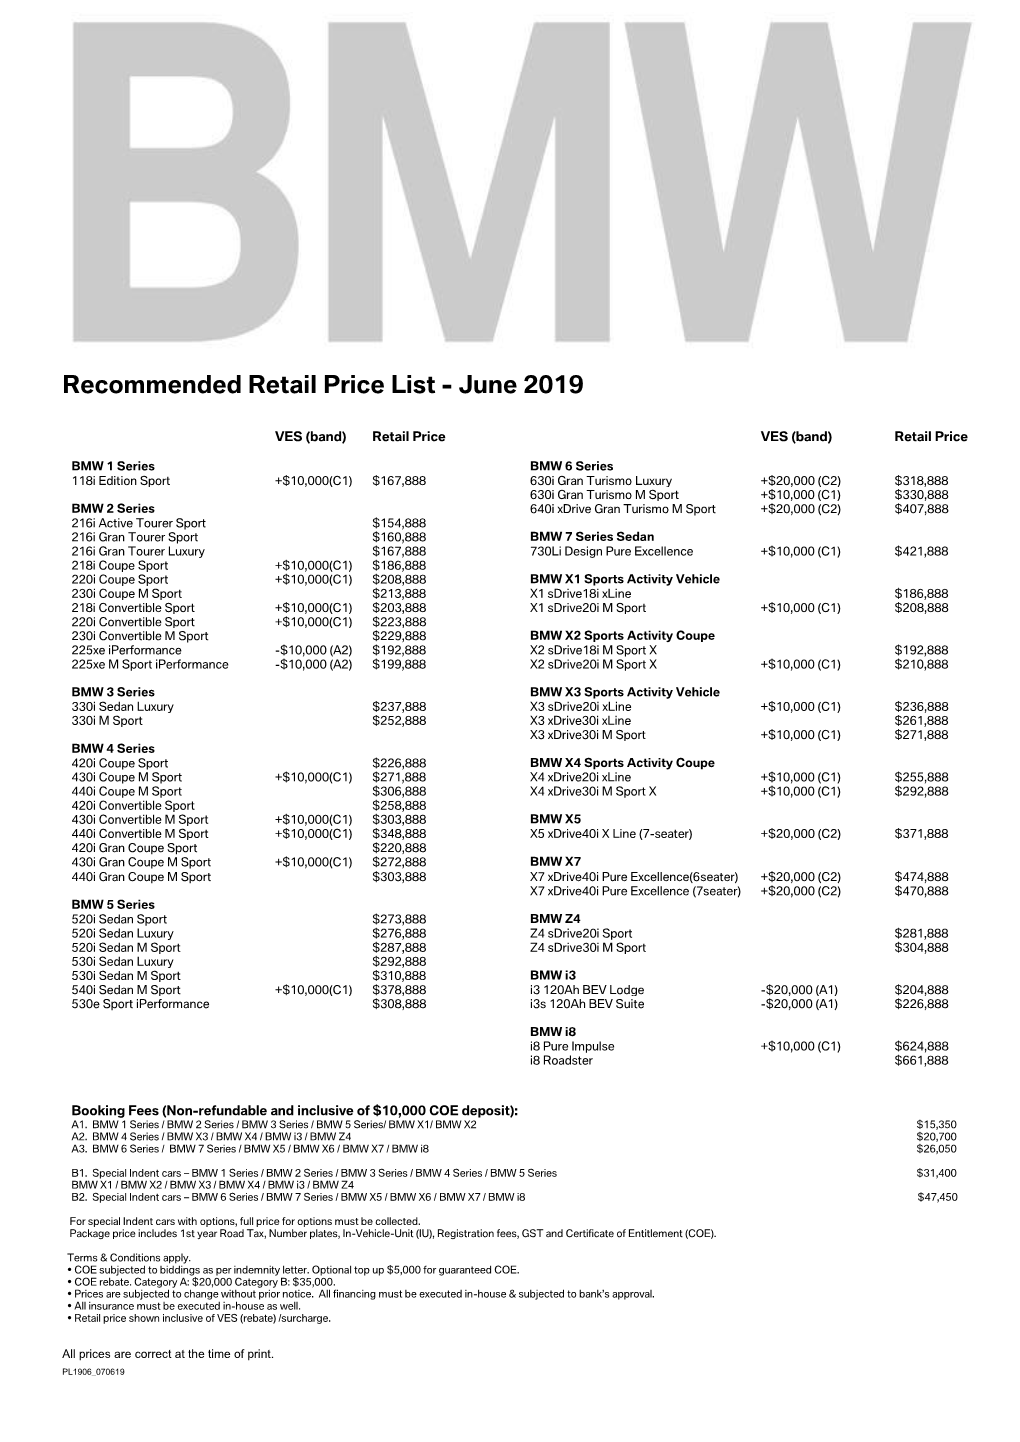 Recommended Retail Price List - June 2019